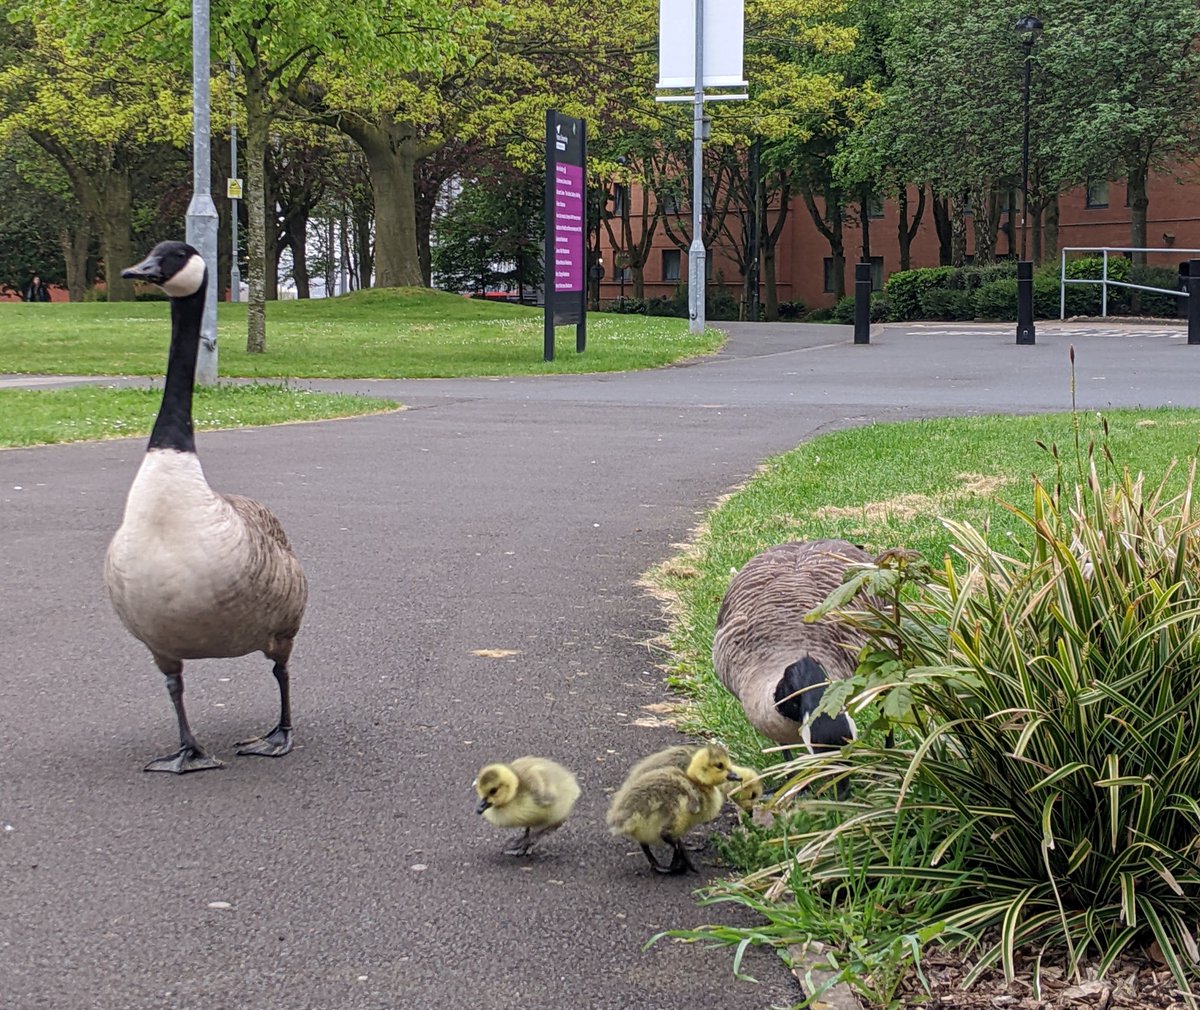 🗓️Save the date! 😎Our summer Undergraduate Open Day is only two months away on 5 July! We'd love to show you around our world-class university. 🪿You might even bump into some of our newest (and fluffiest!) residents during your visit ➡️Book your place tinyurl.com/yc43x95d